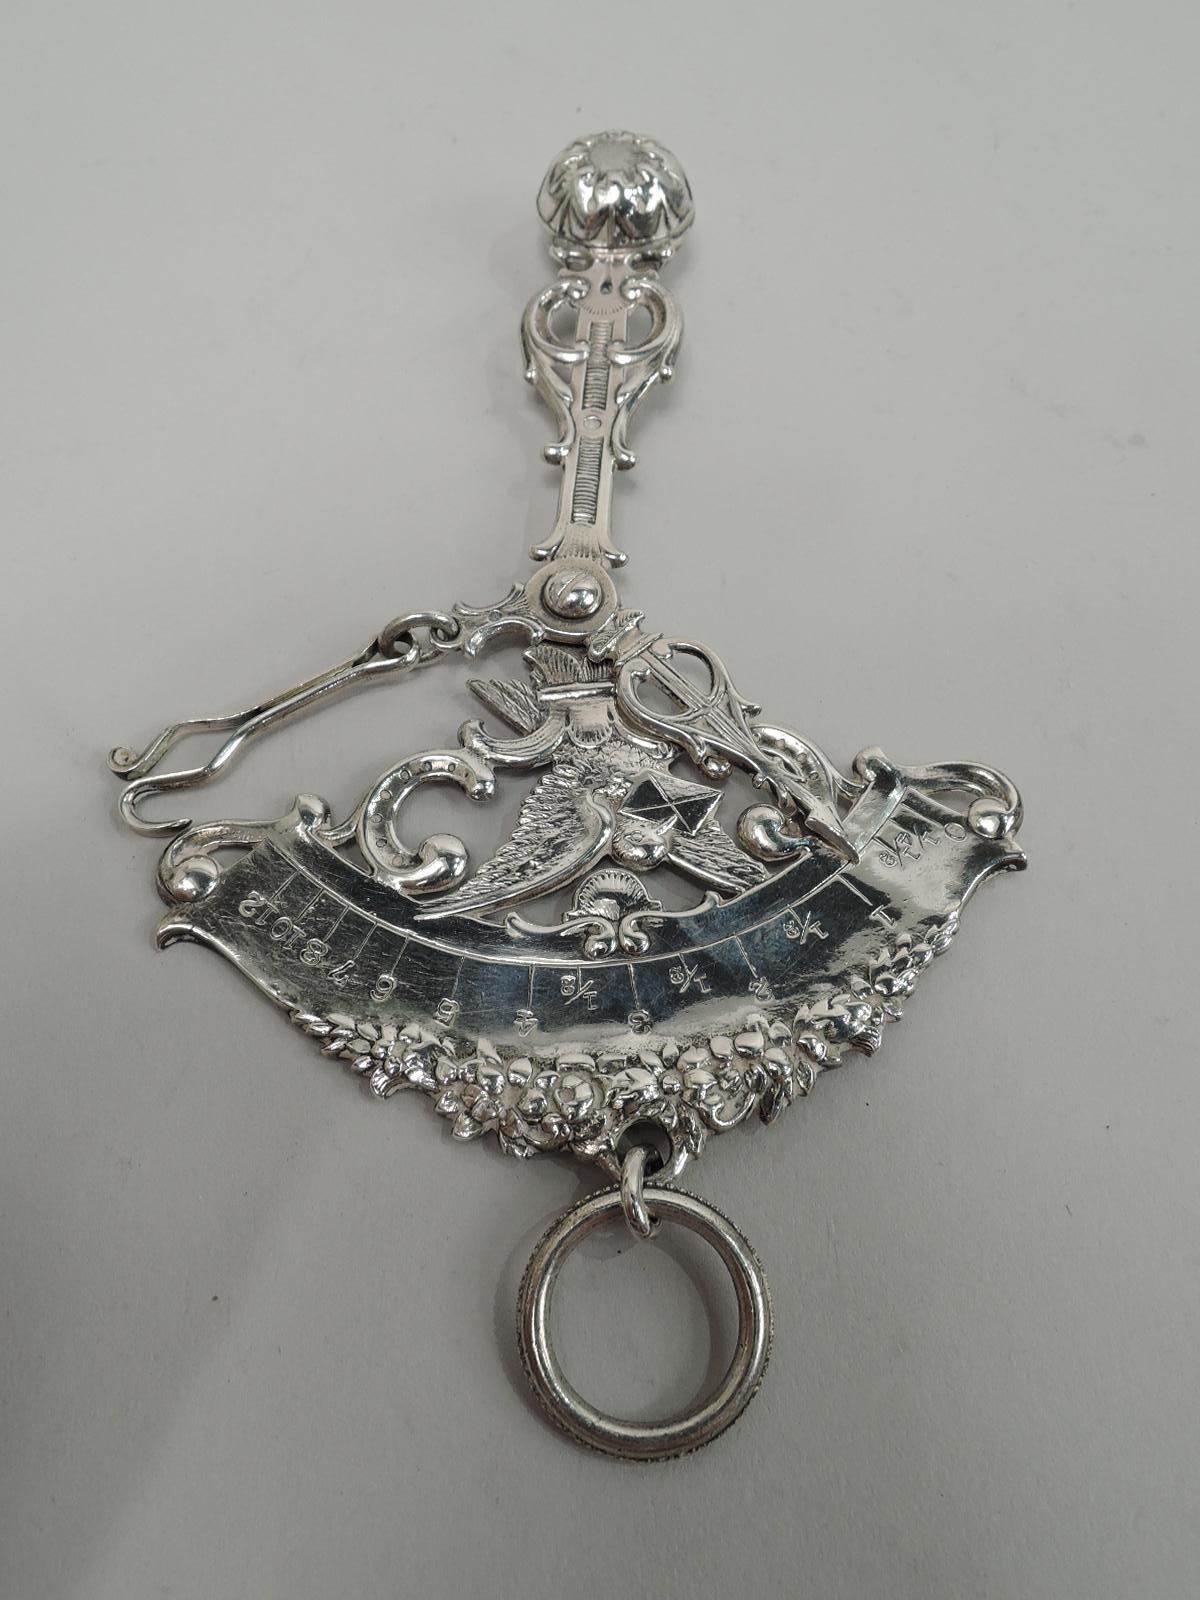 Turn-of-the-century Victorian Rococo sterling silver postage scale. Made by Gorham in Providence. Sweet and romantic with garland, scrolls, and letter-bearing dove. Measures up to 12 ounces of epistolary passion. With loose-mounted ring. Fully